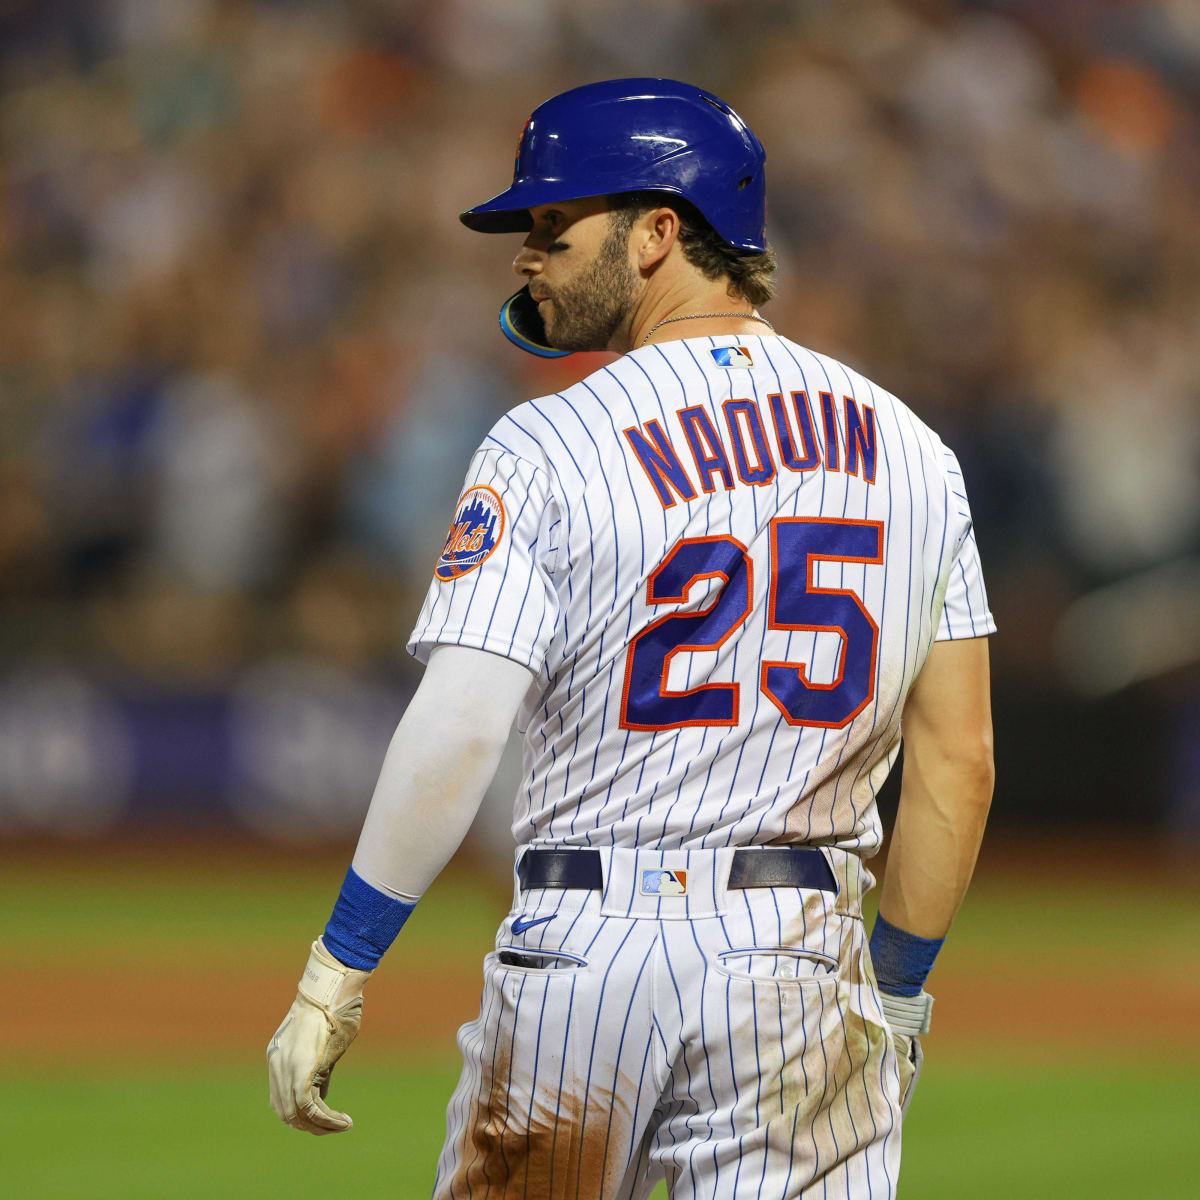 Outfielder Tyler Naquin Talks Facing Former Team, Joining New York Mets -  Sports Illustrated New York Mets News, Analysis and More